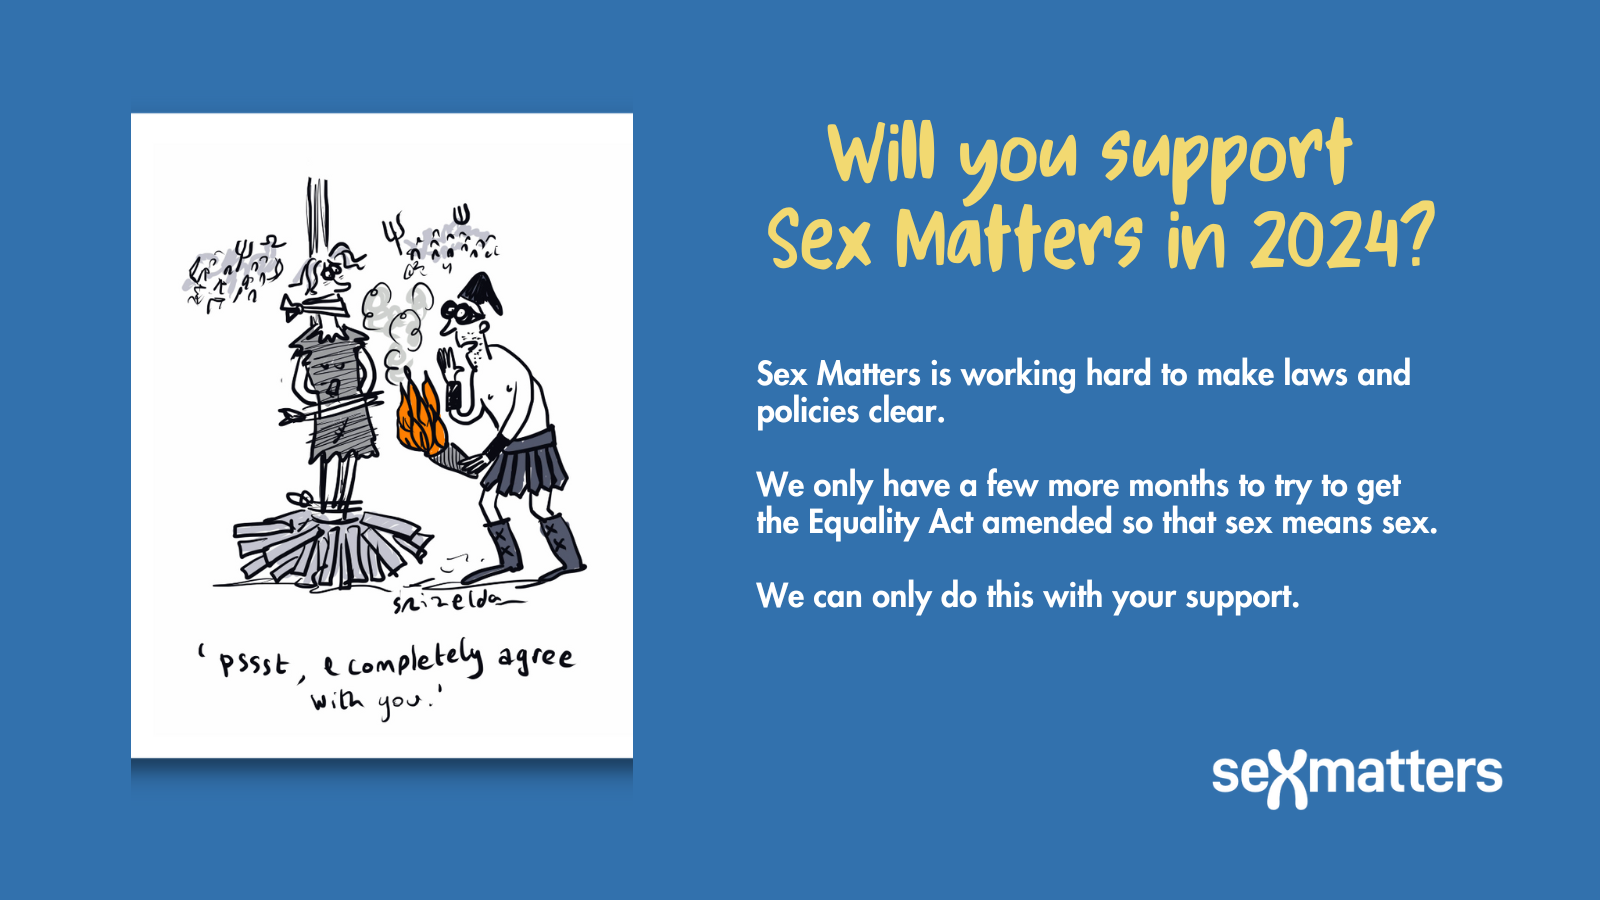 Will you support Sex Matters in 2024?